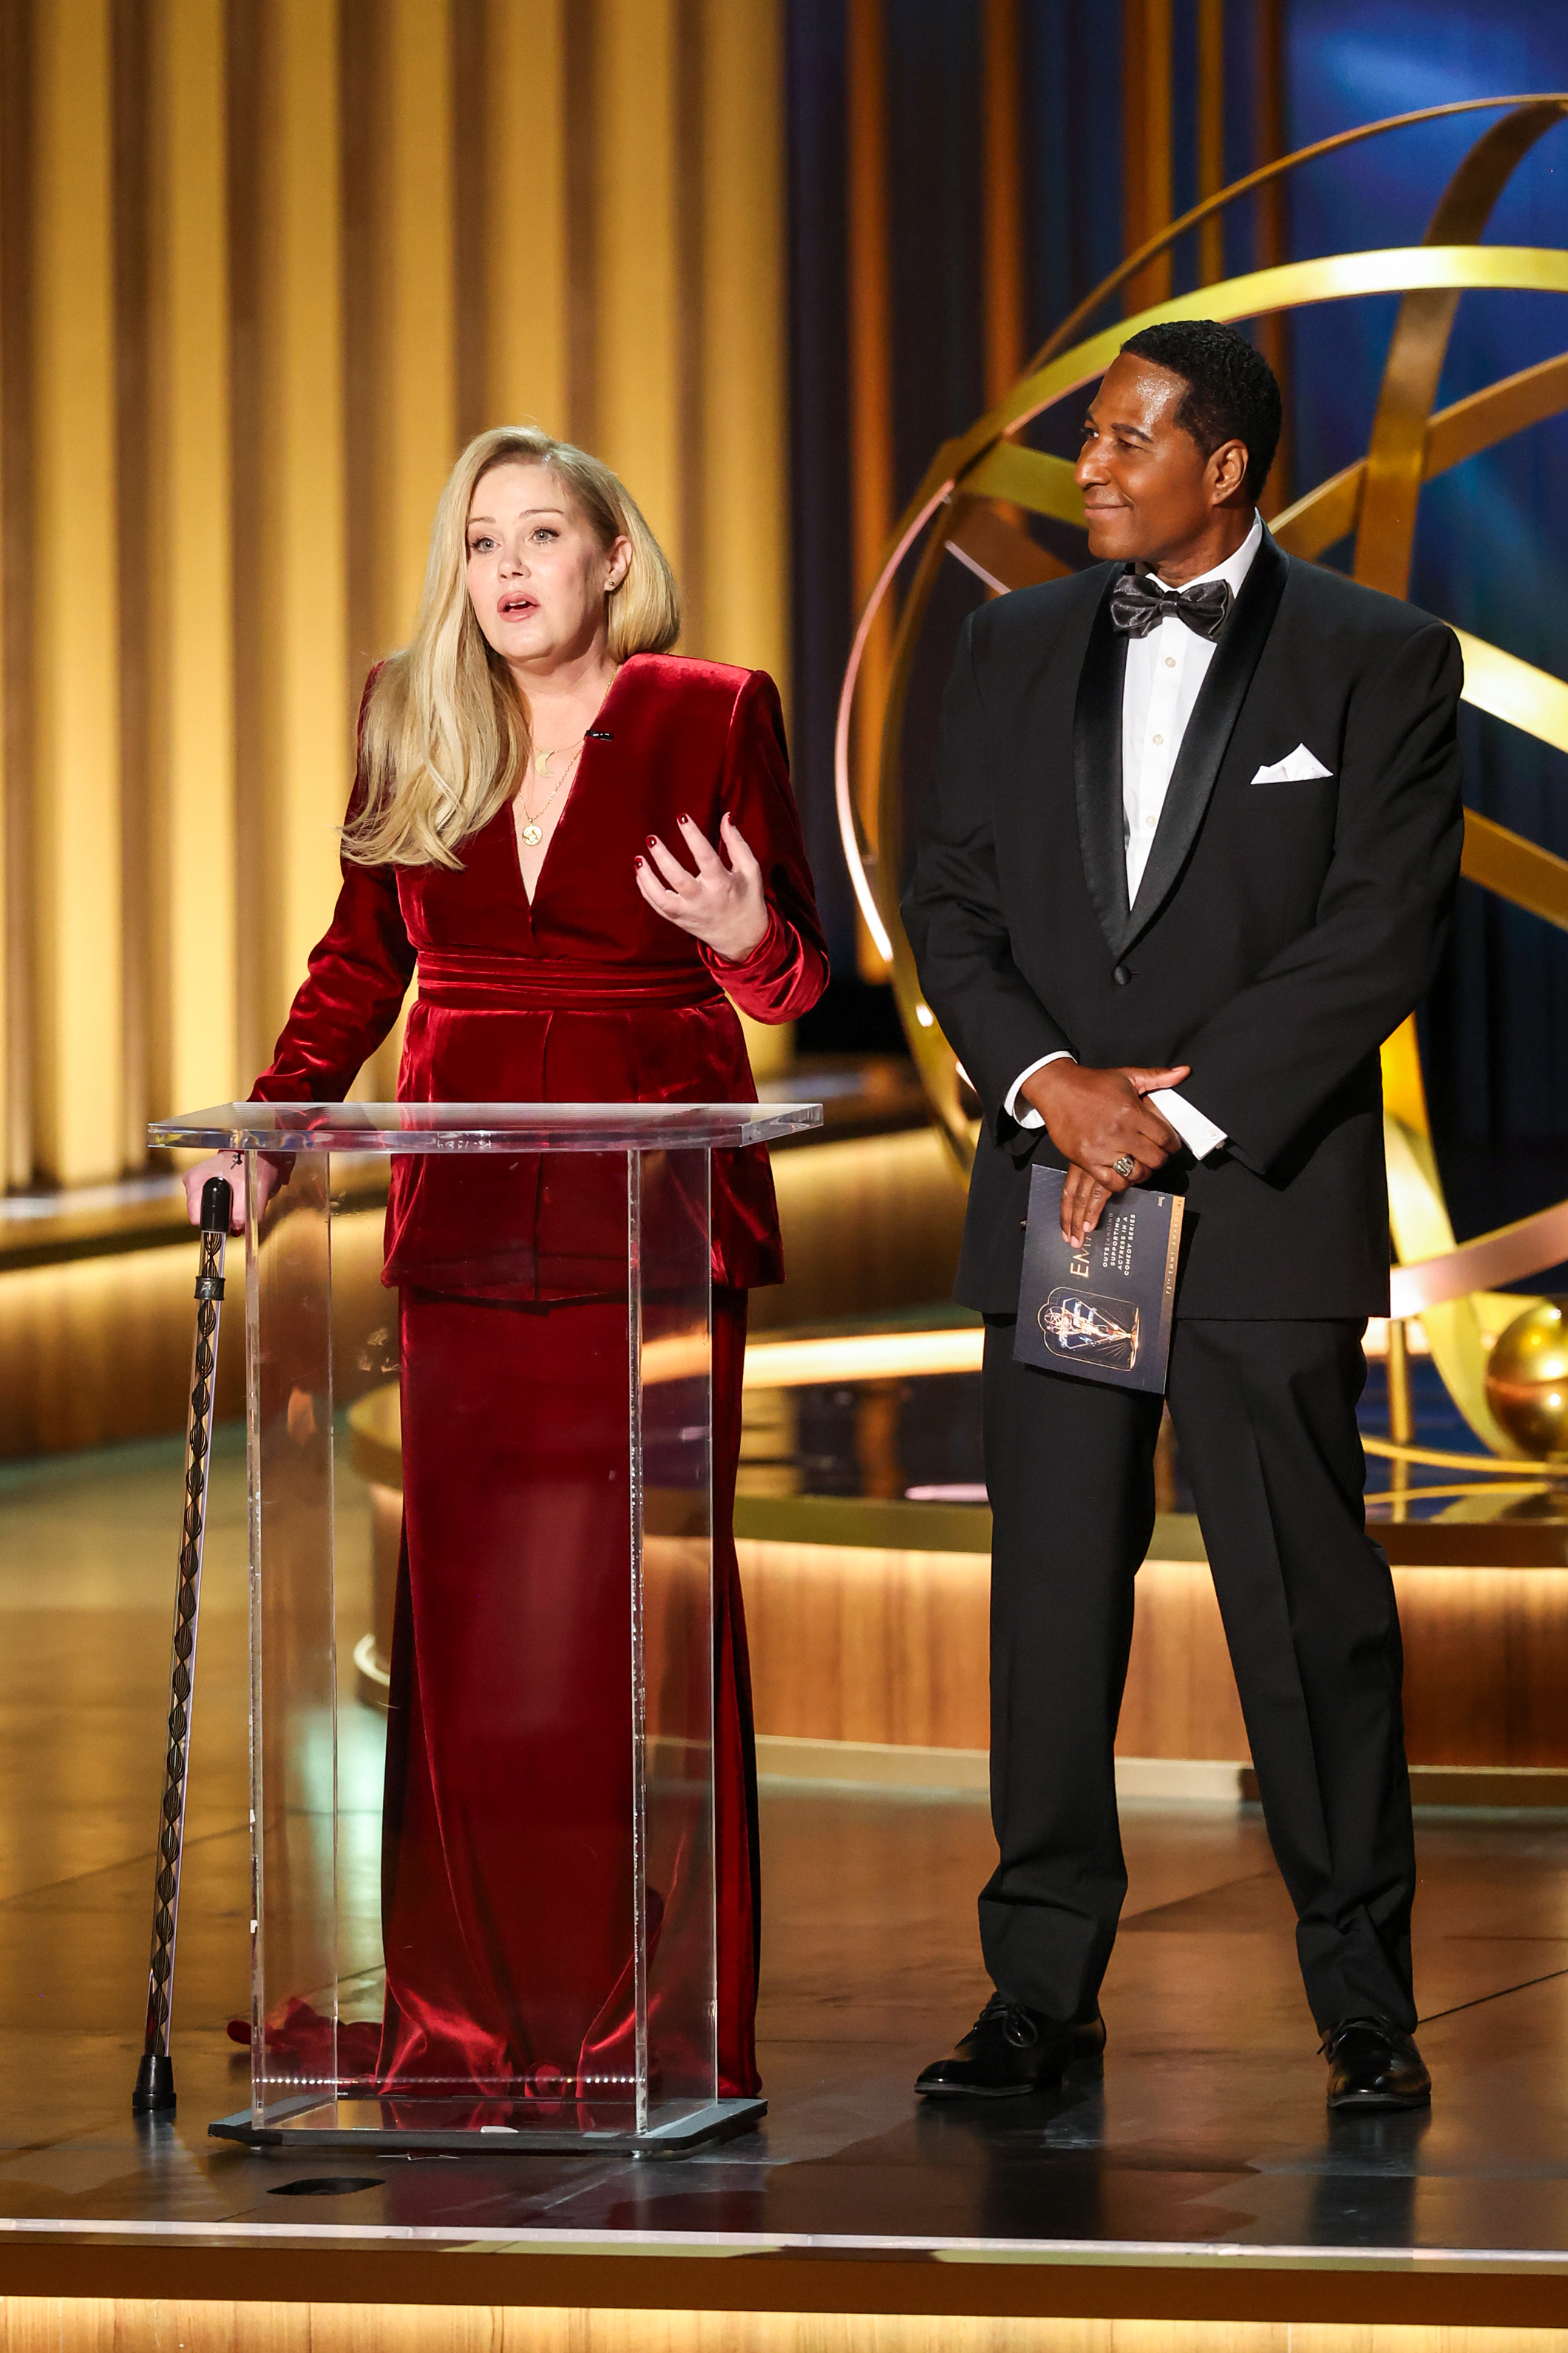 Christina Applegate onstage at the Emmys